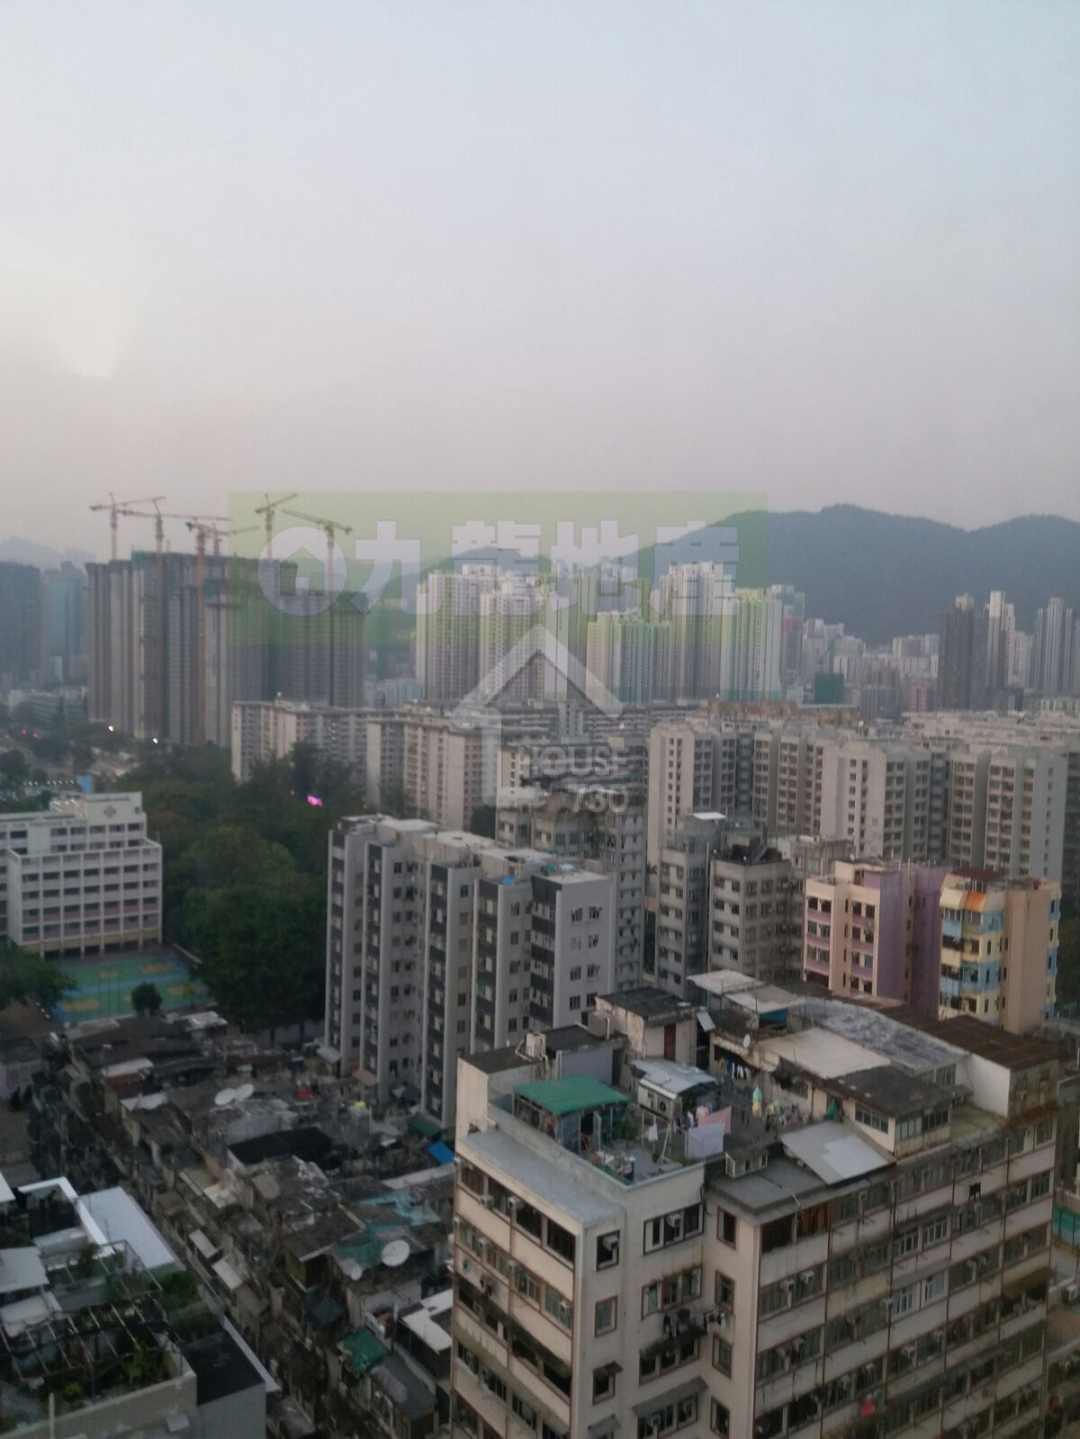 Sham Shui Po KENT PLACE Upper Floor View from Living Room House730-6580207